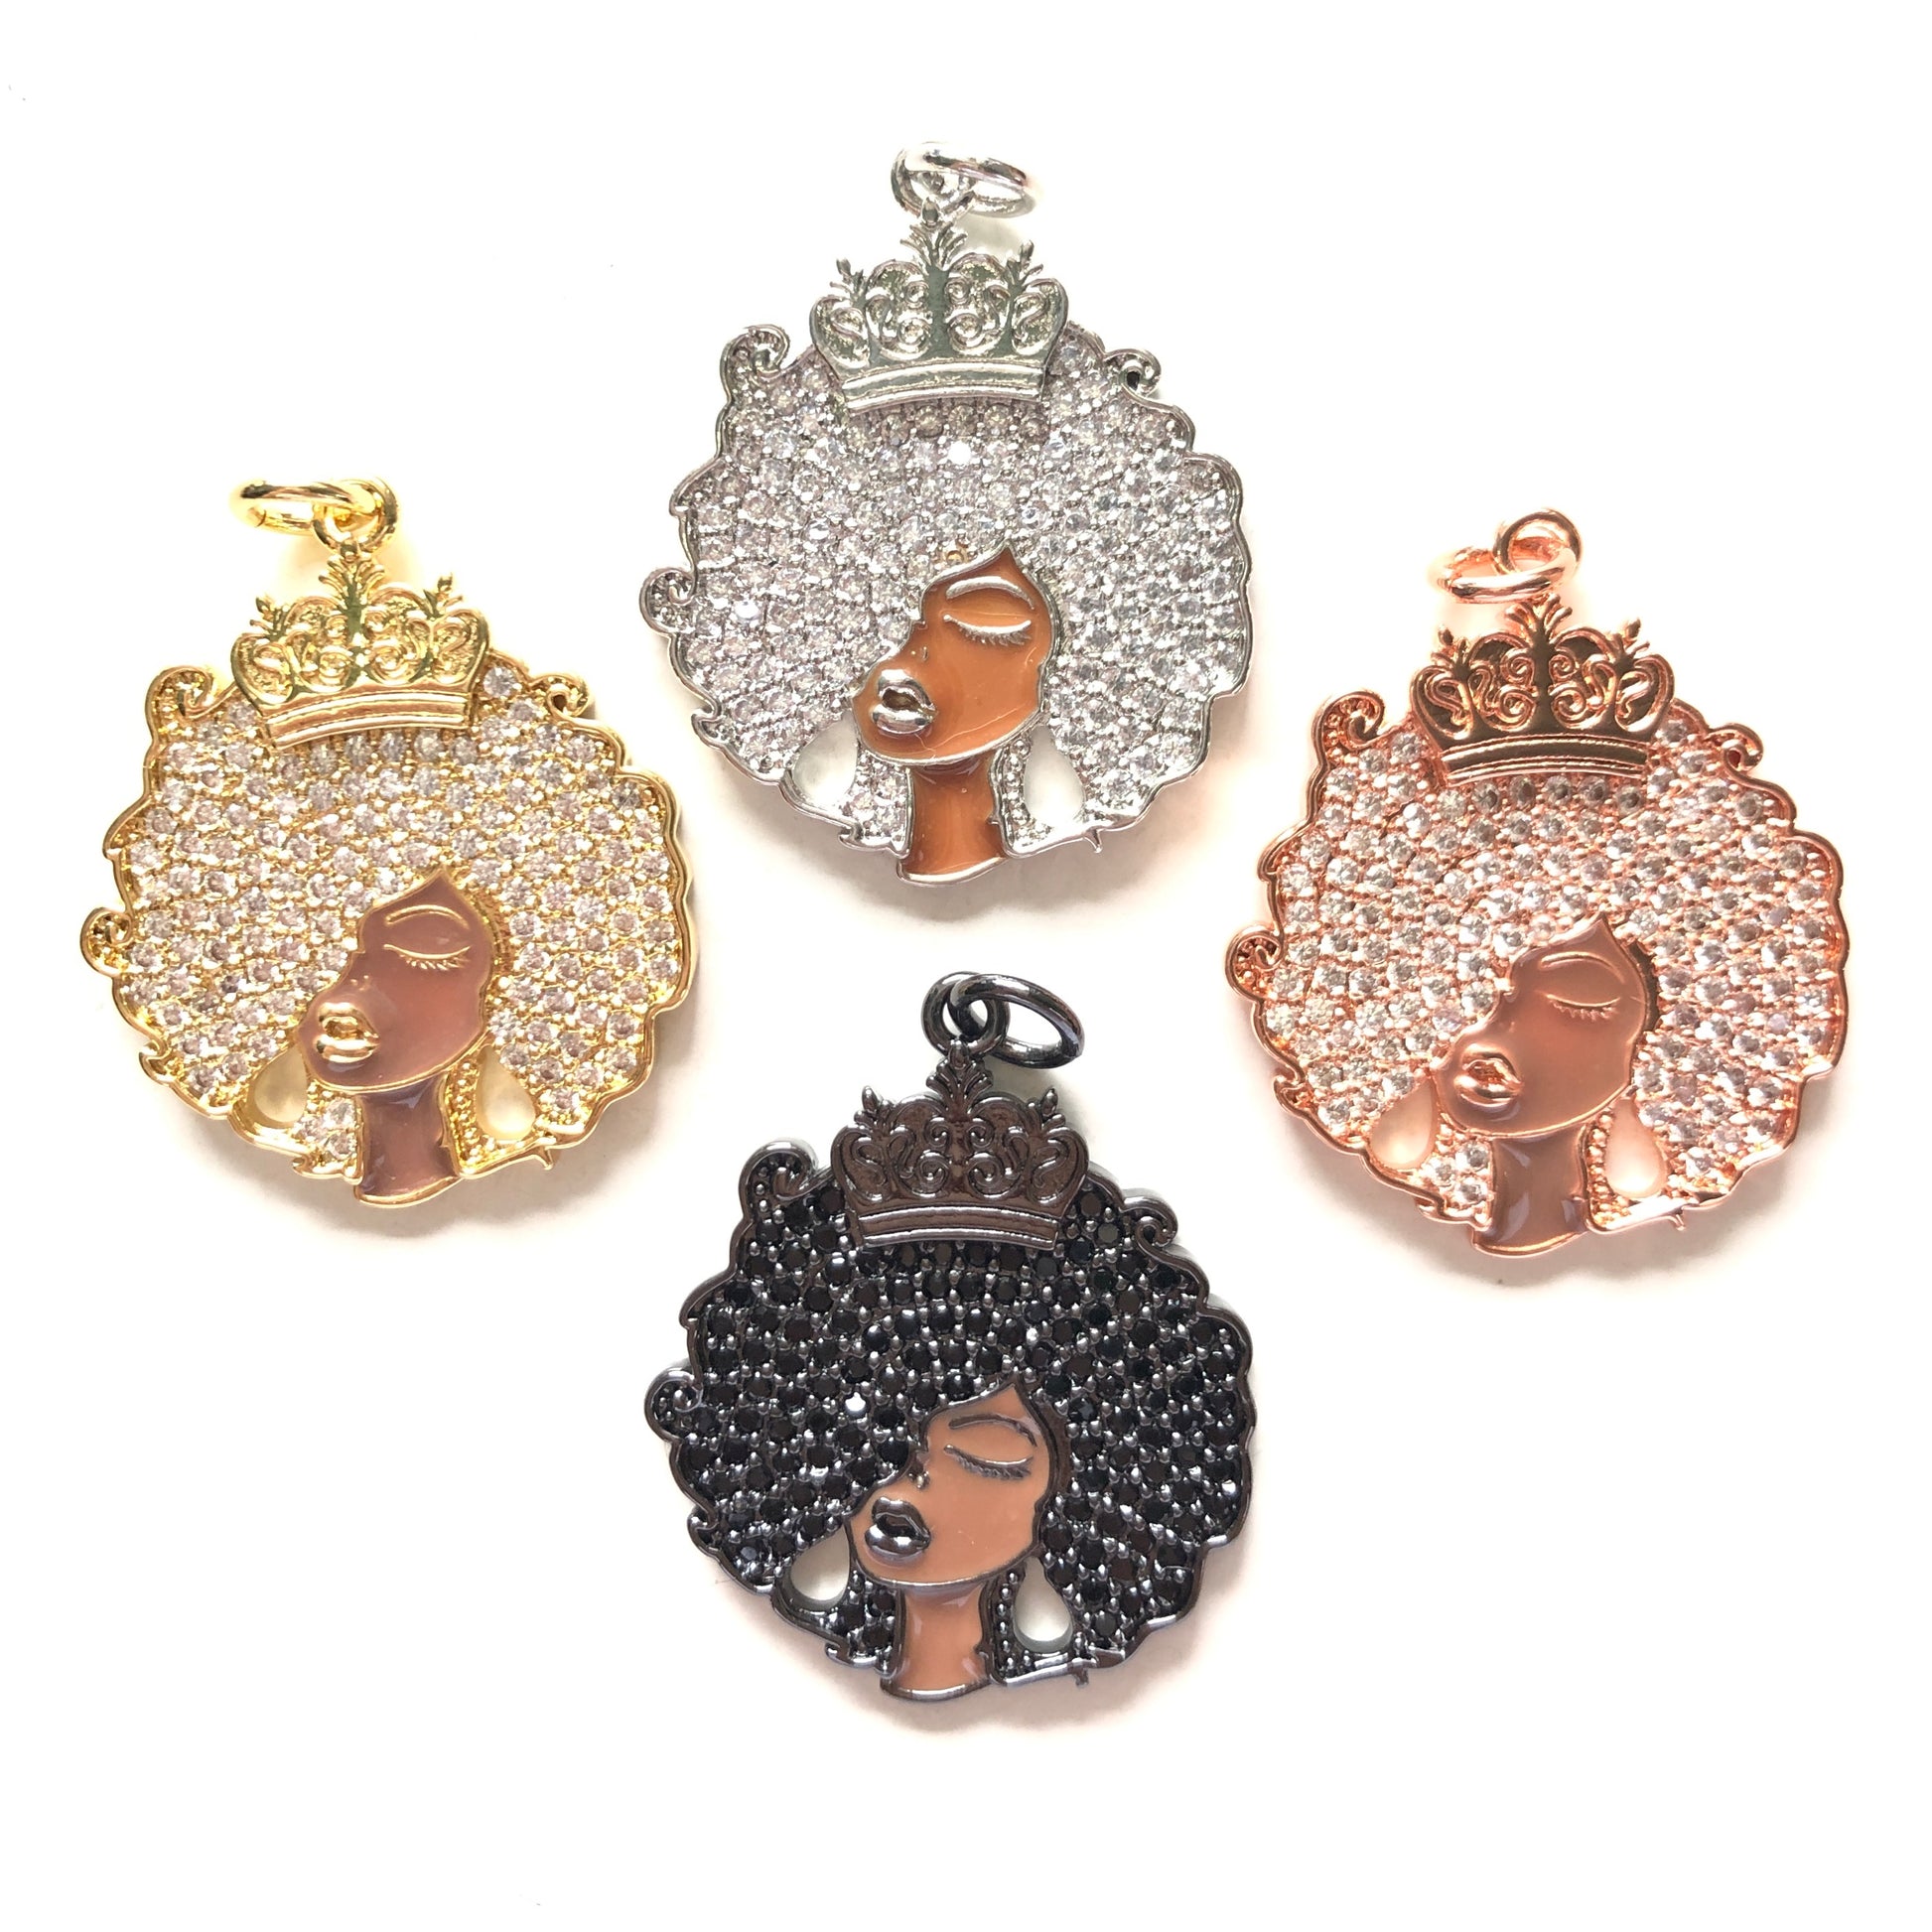 10pcs/lot 31.6*26mm CZ Afro Girl Black Queen Charm Pendants Mix Colors CZ Paved Charms Afro Girl/Queen Charms On Sale Charms Beads Beyond